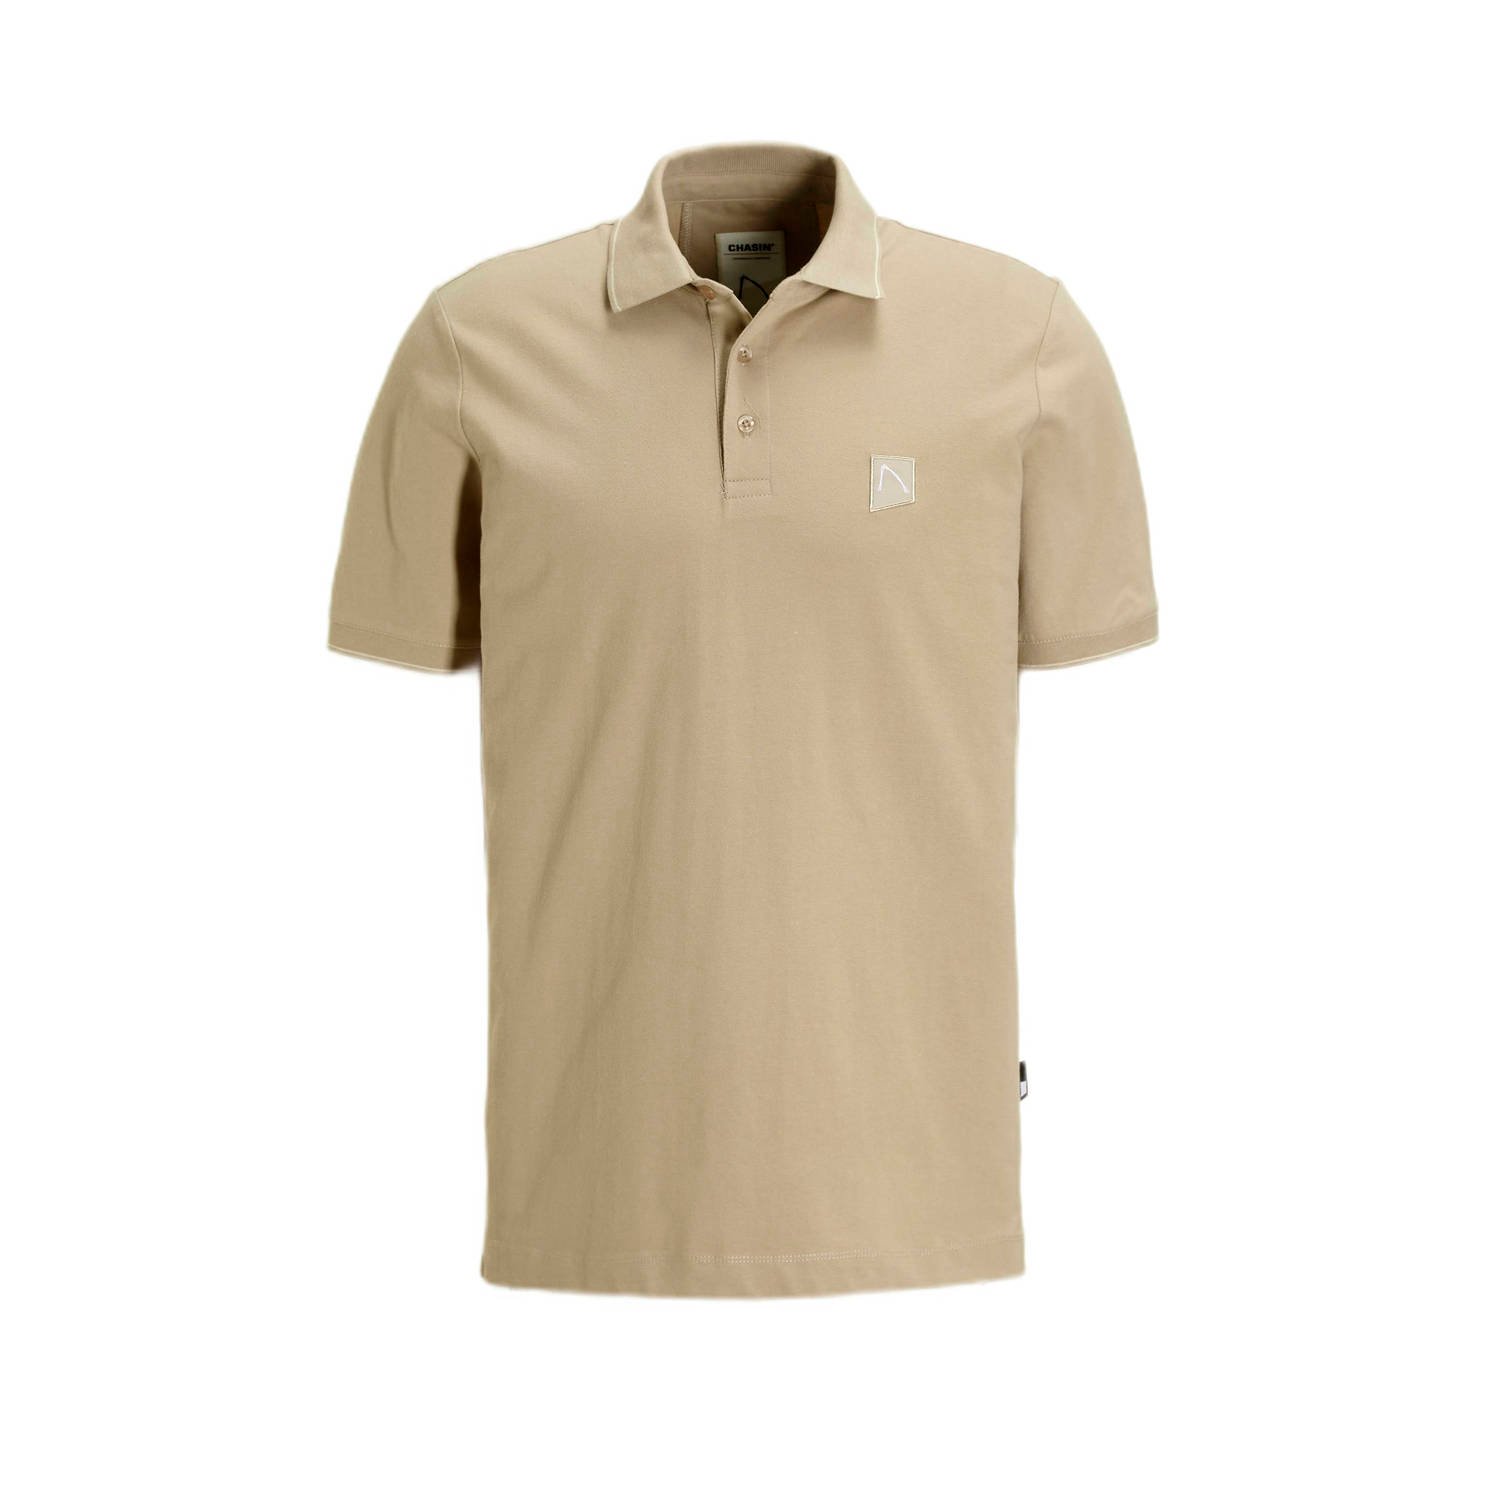 CHASIN' slim fit polo JAY met logo taupe